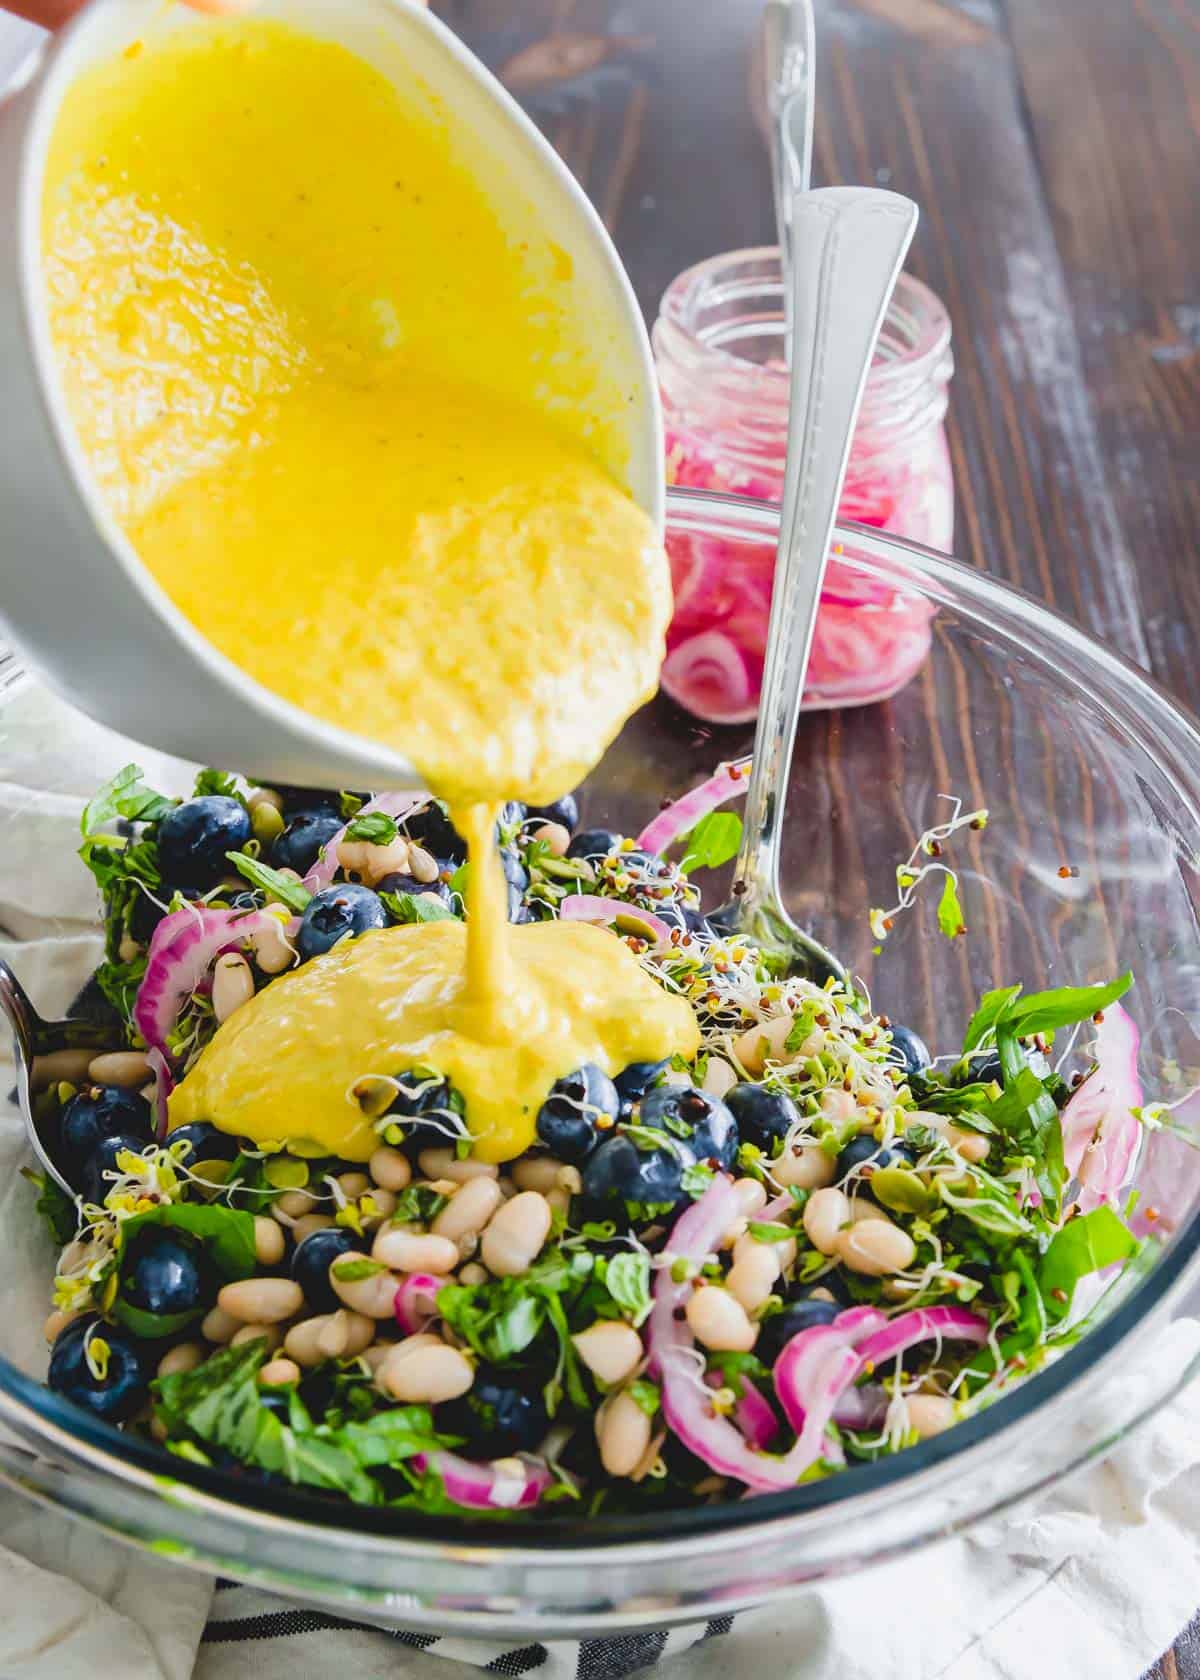 This blueberry white bean salad is tossed with a golden turmeric tahini dressing for a deliciously healthy side dish or plant based meal.